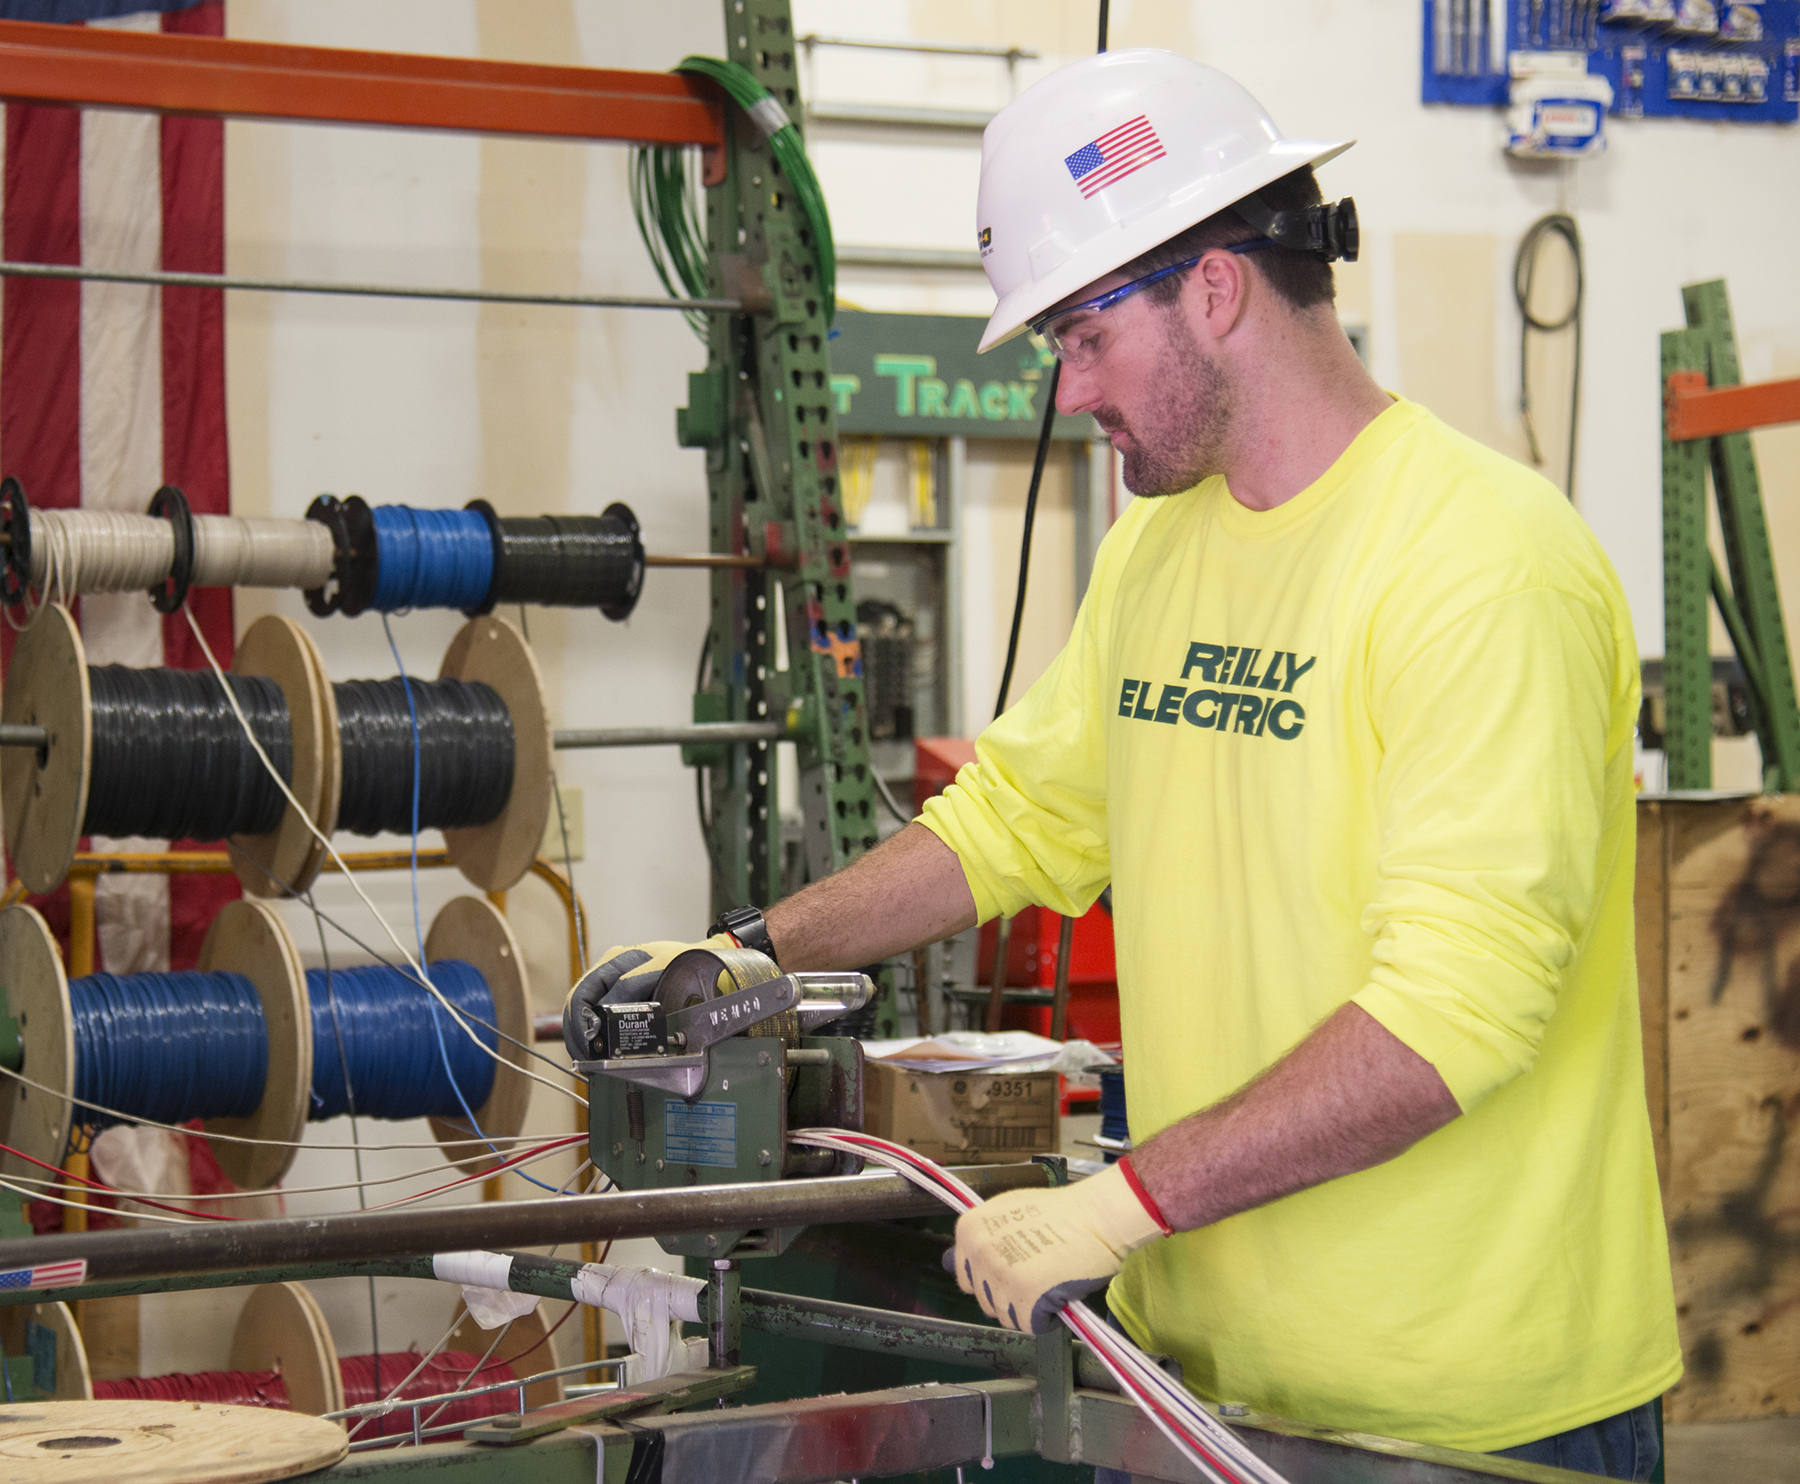 RELCO personnel at work for use by Reilly Electric Company